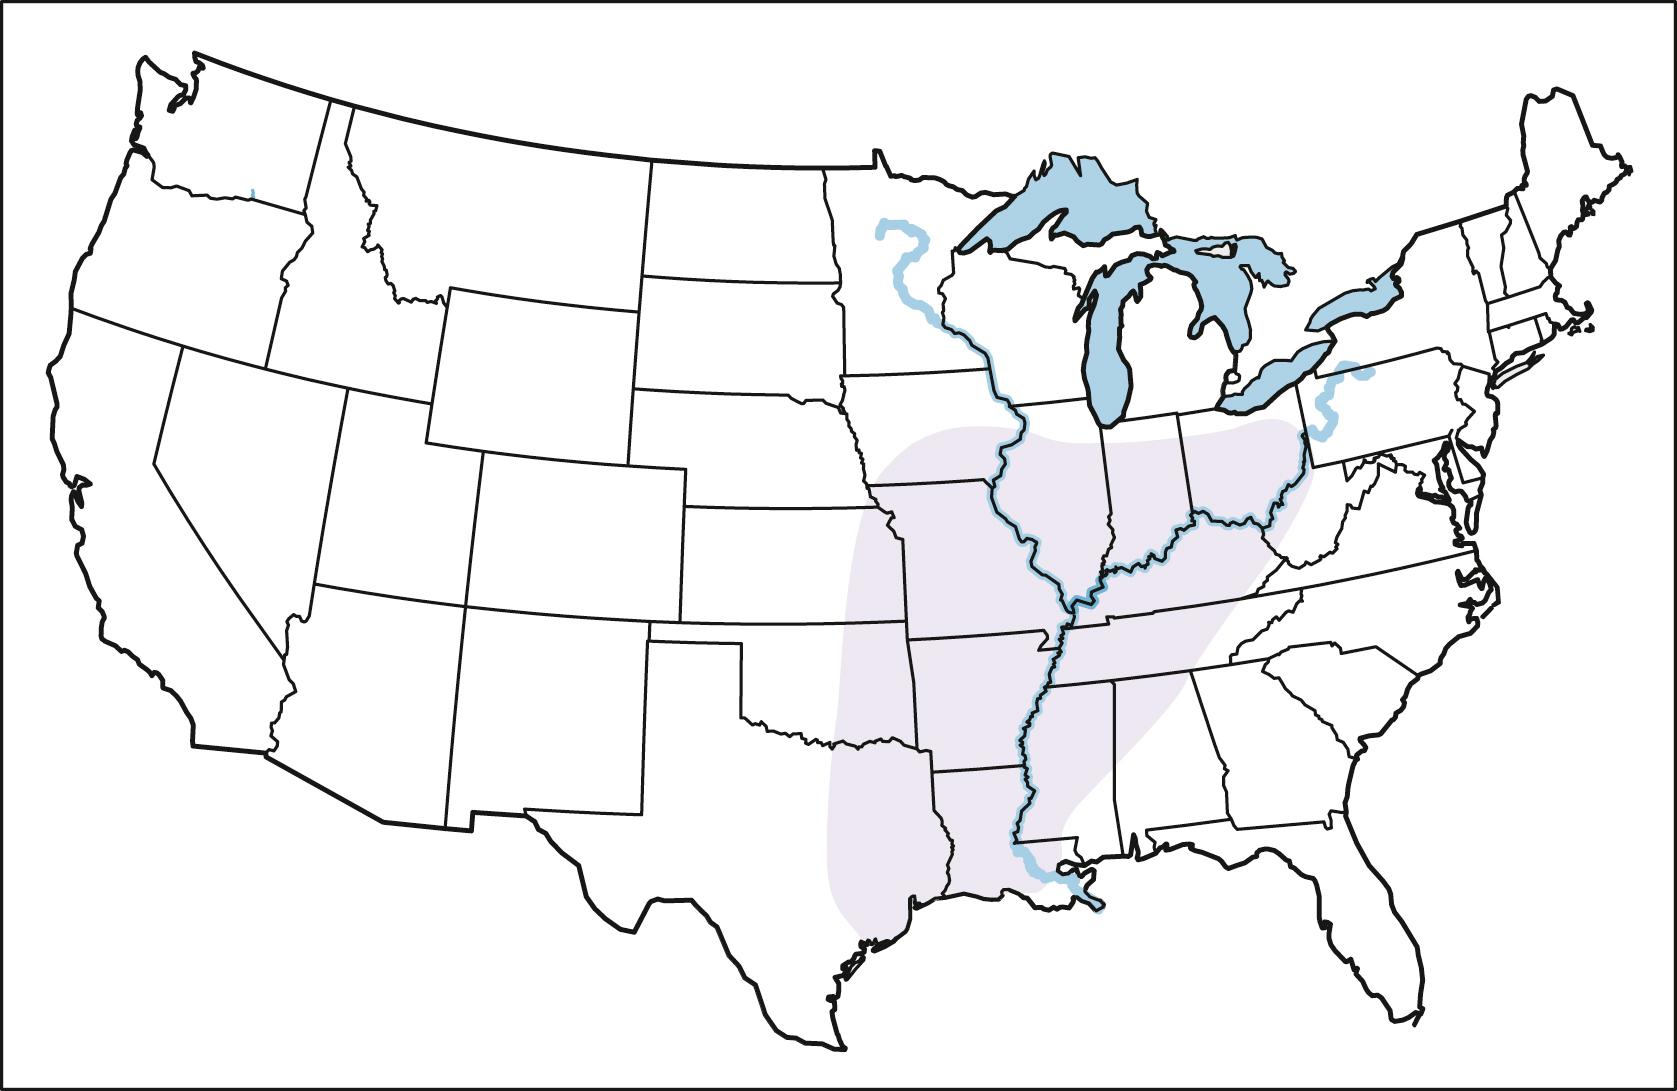 Figure 250.2, US map showing the most highly endemic regions for Histoplasma capsulatum, the Ohio and Mississippi river valleys.